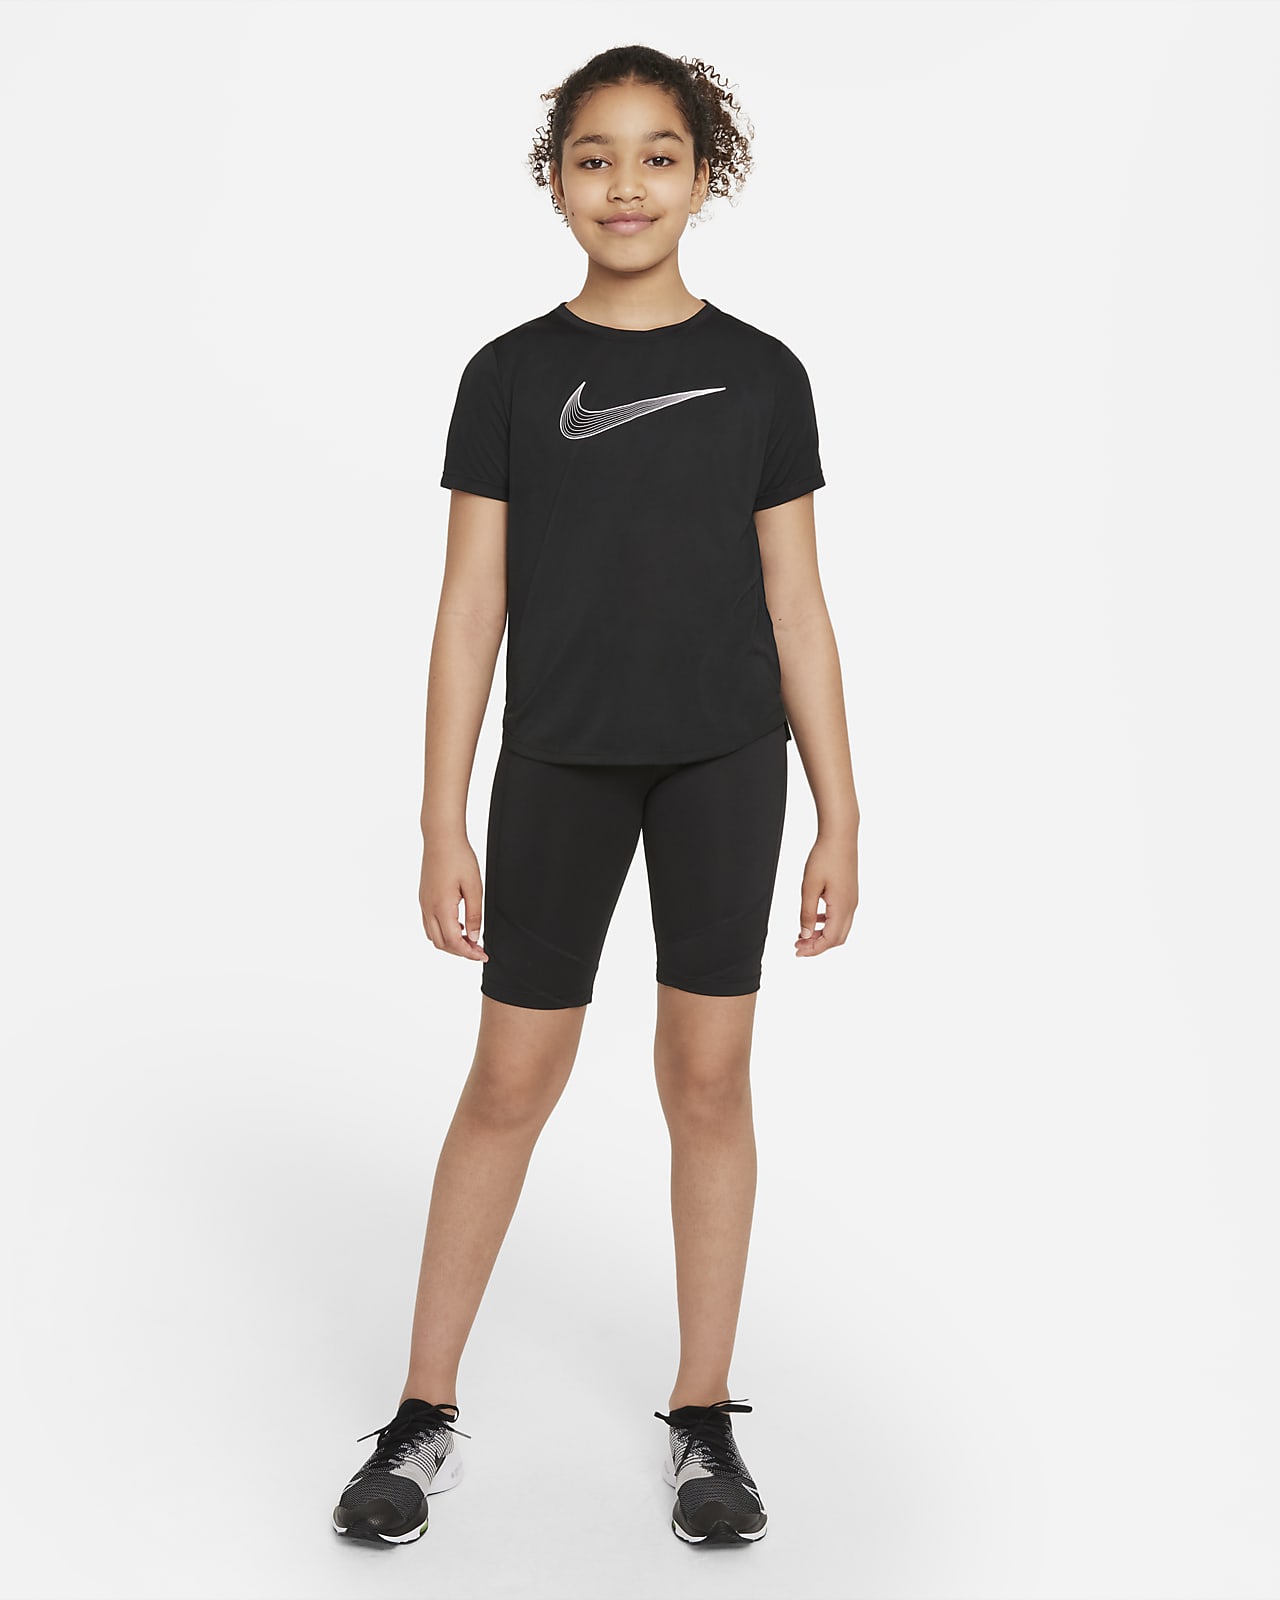 $40 NEW Big Girls Nike ONE FULL Length Training Compression Tights BV3092  SMALL